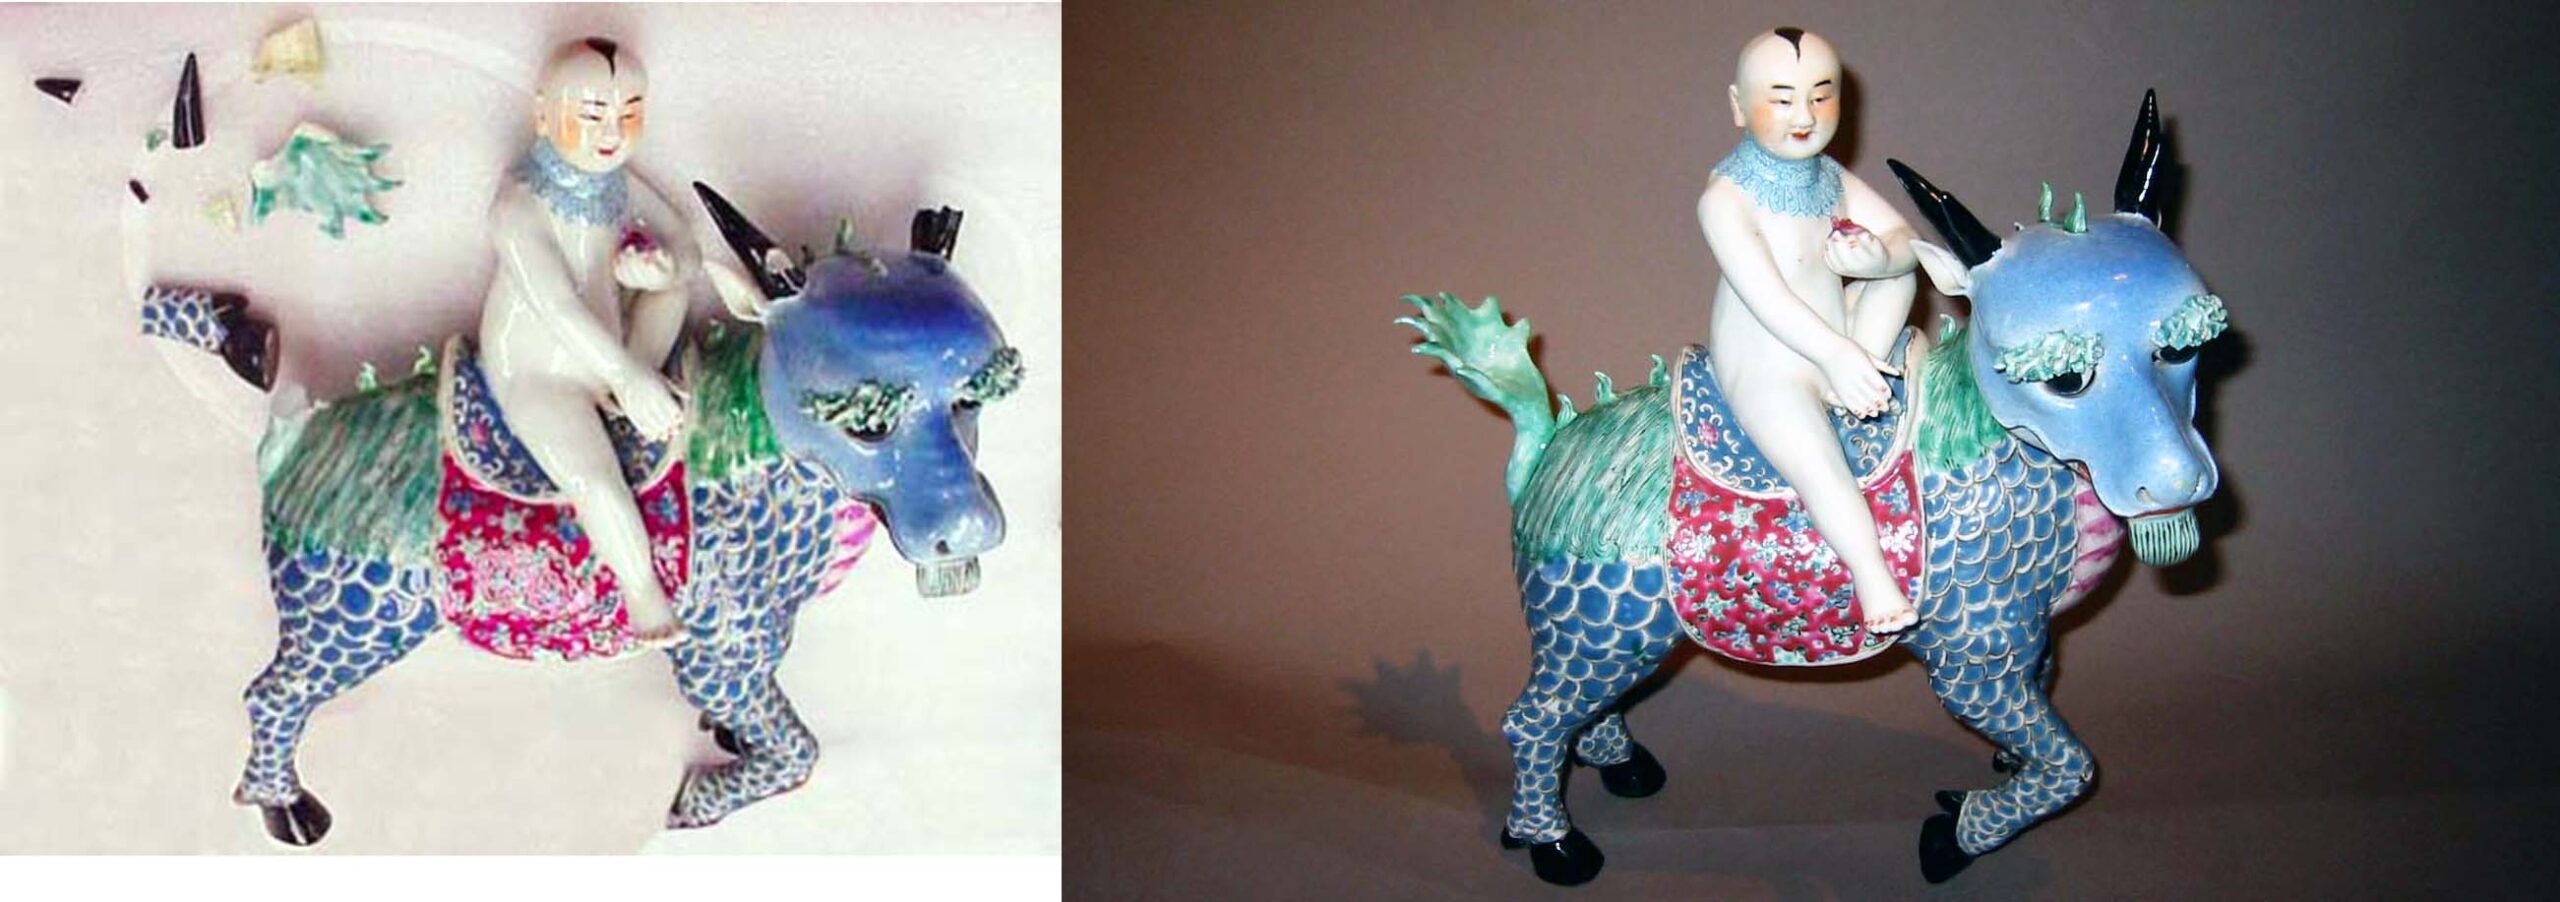 A ceramic horse and a blue cow are on display.